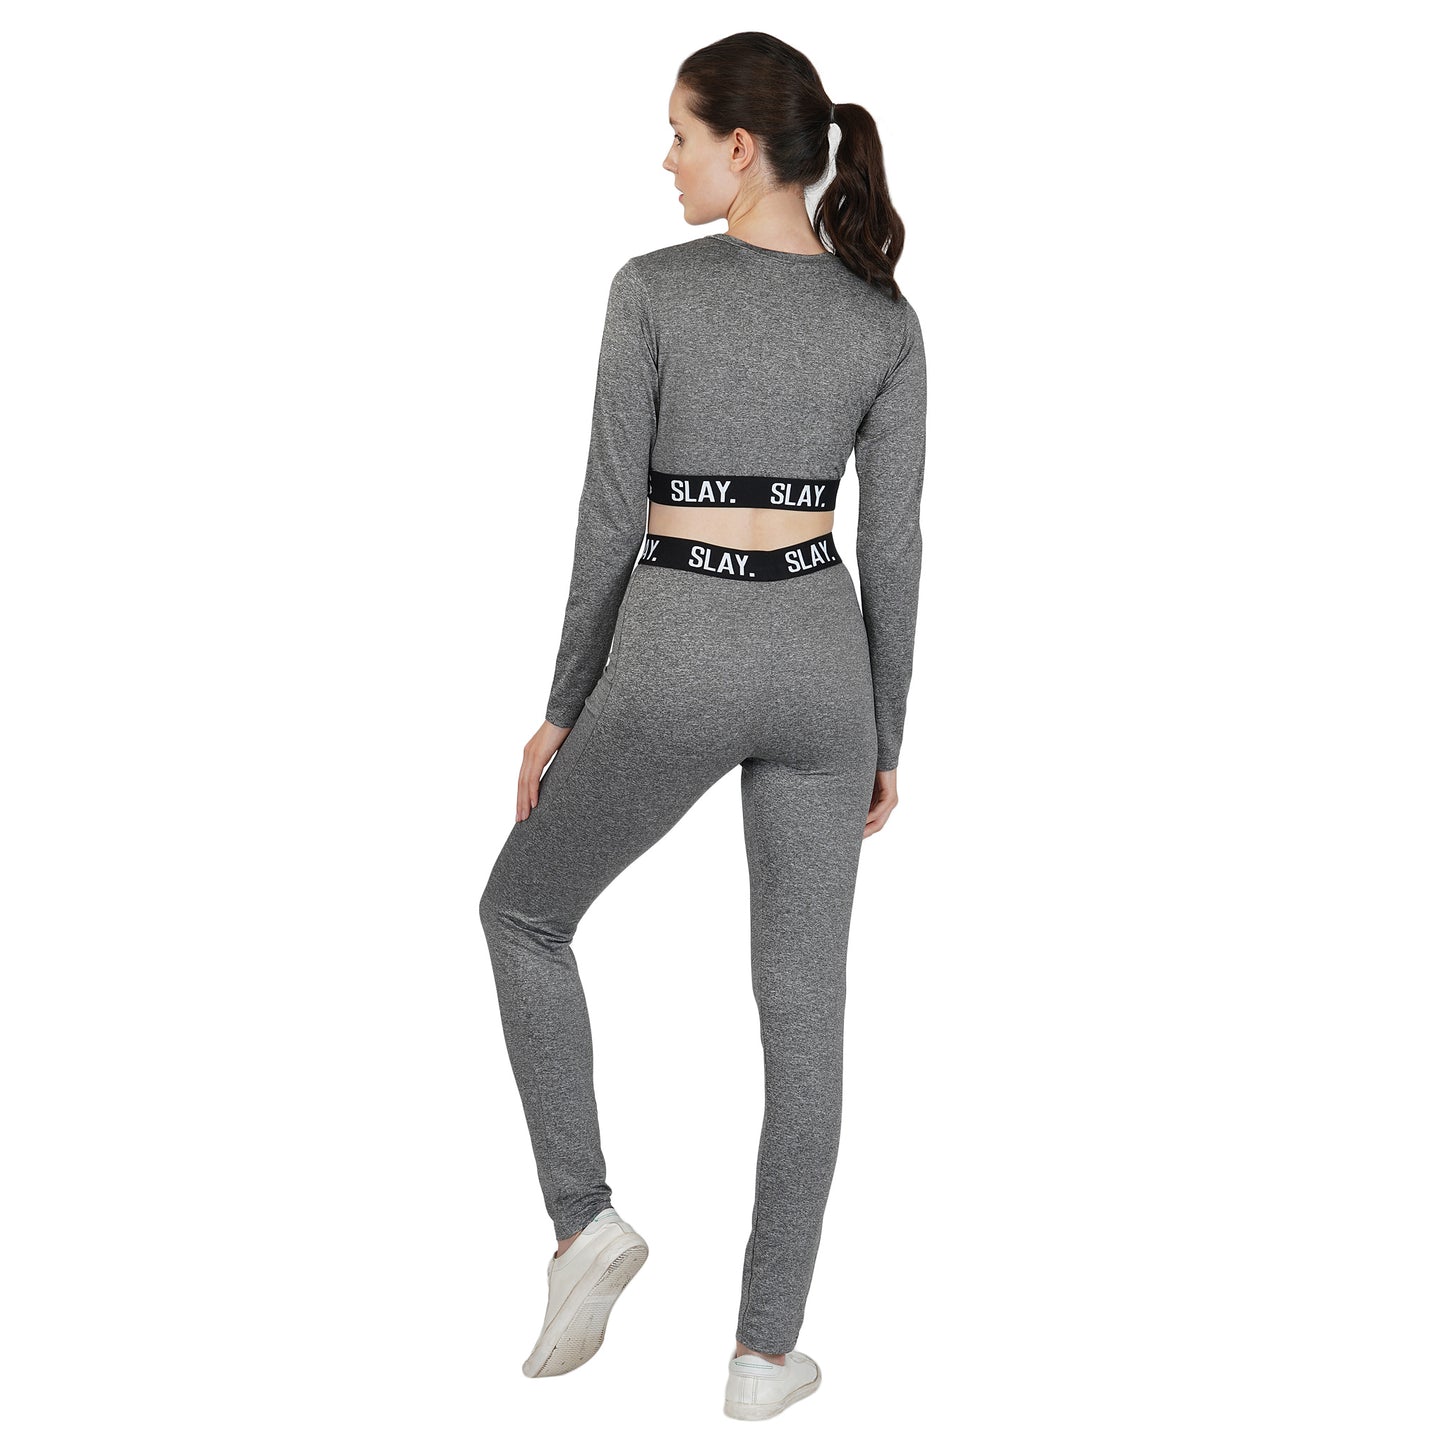 SLAY. Sport Women's Activewear Full Sleeves Crop Top And Pants Co ord Set